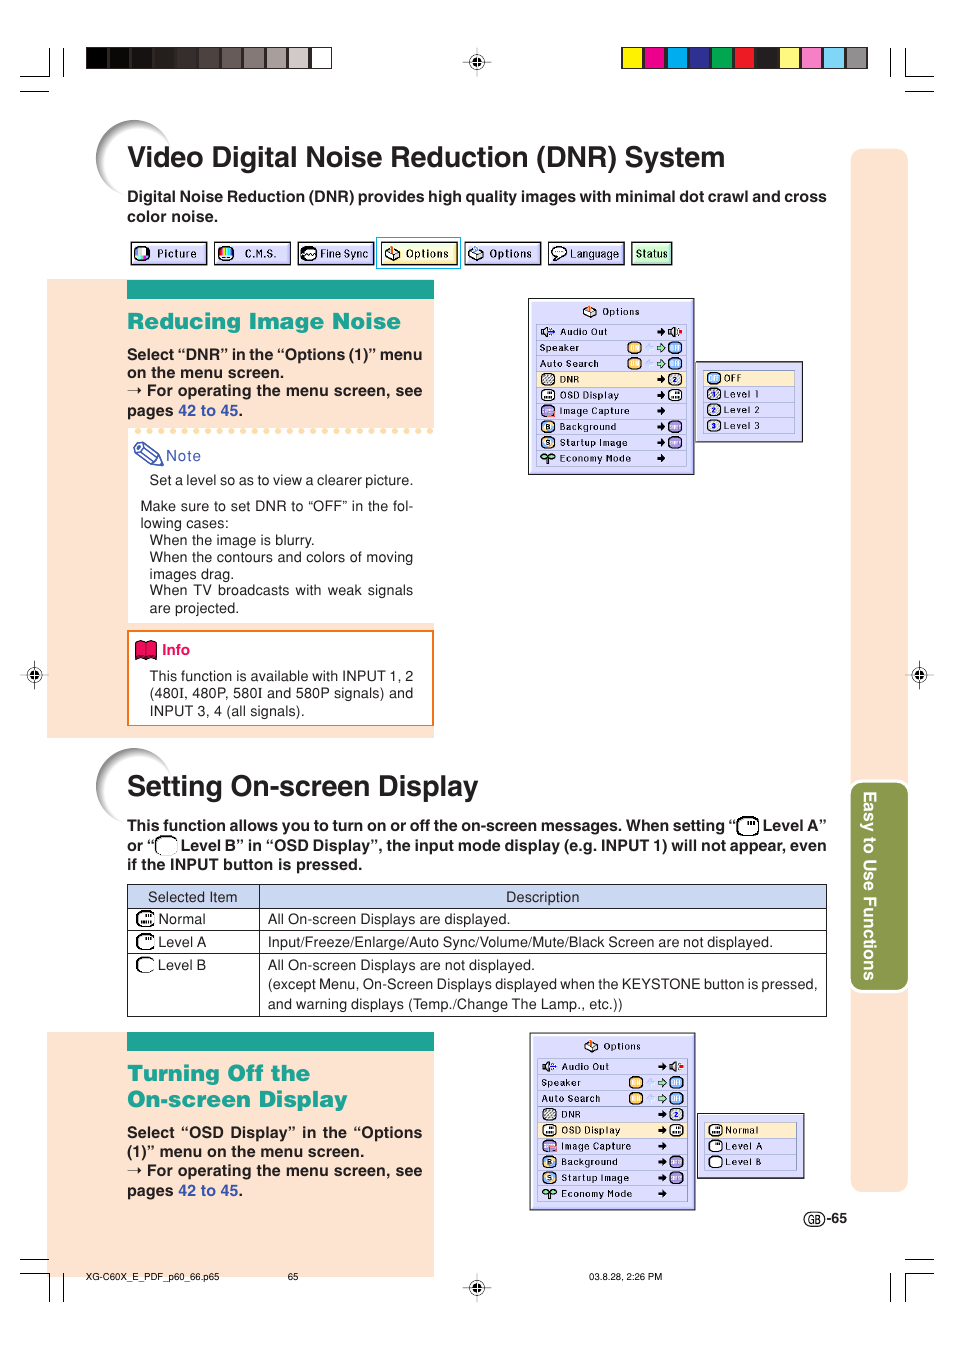 Video digital noise reduction (dnr) system, Setting on-screen display, Reducing image noise | Turning off the on-screen display | Sharp XG-C60X User Manual | Page 69 / 106